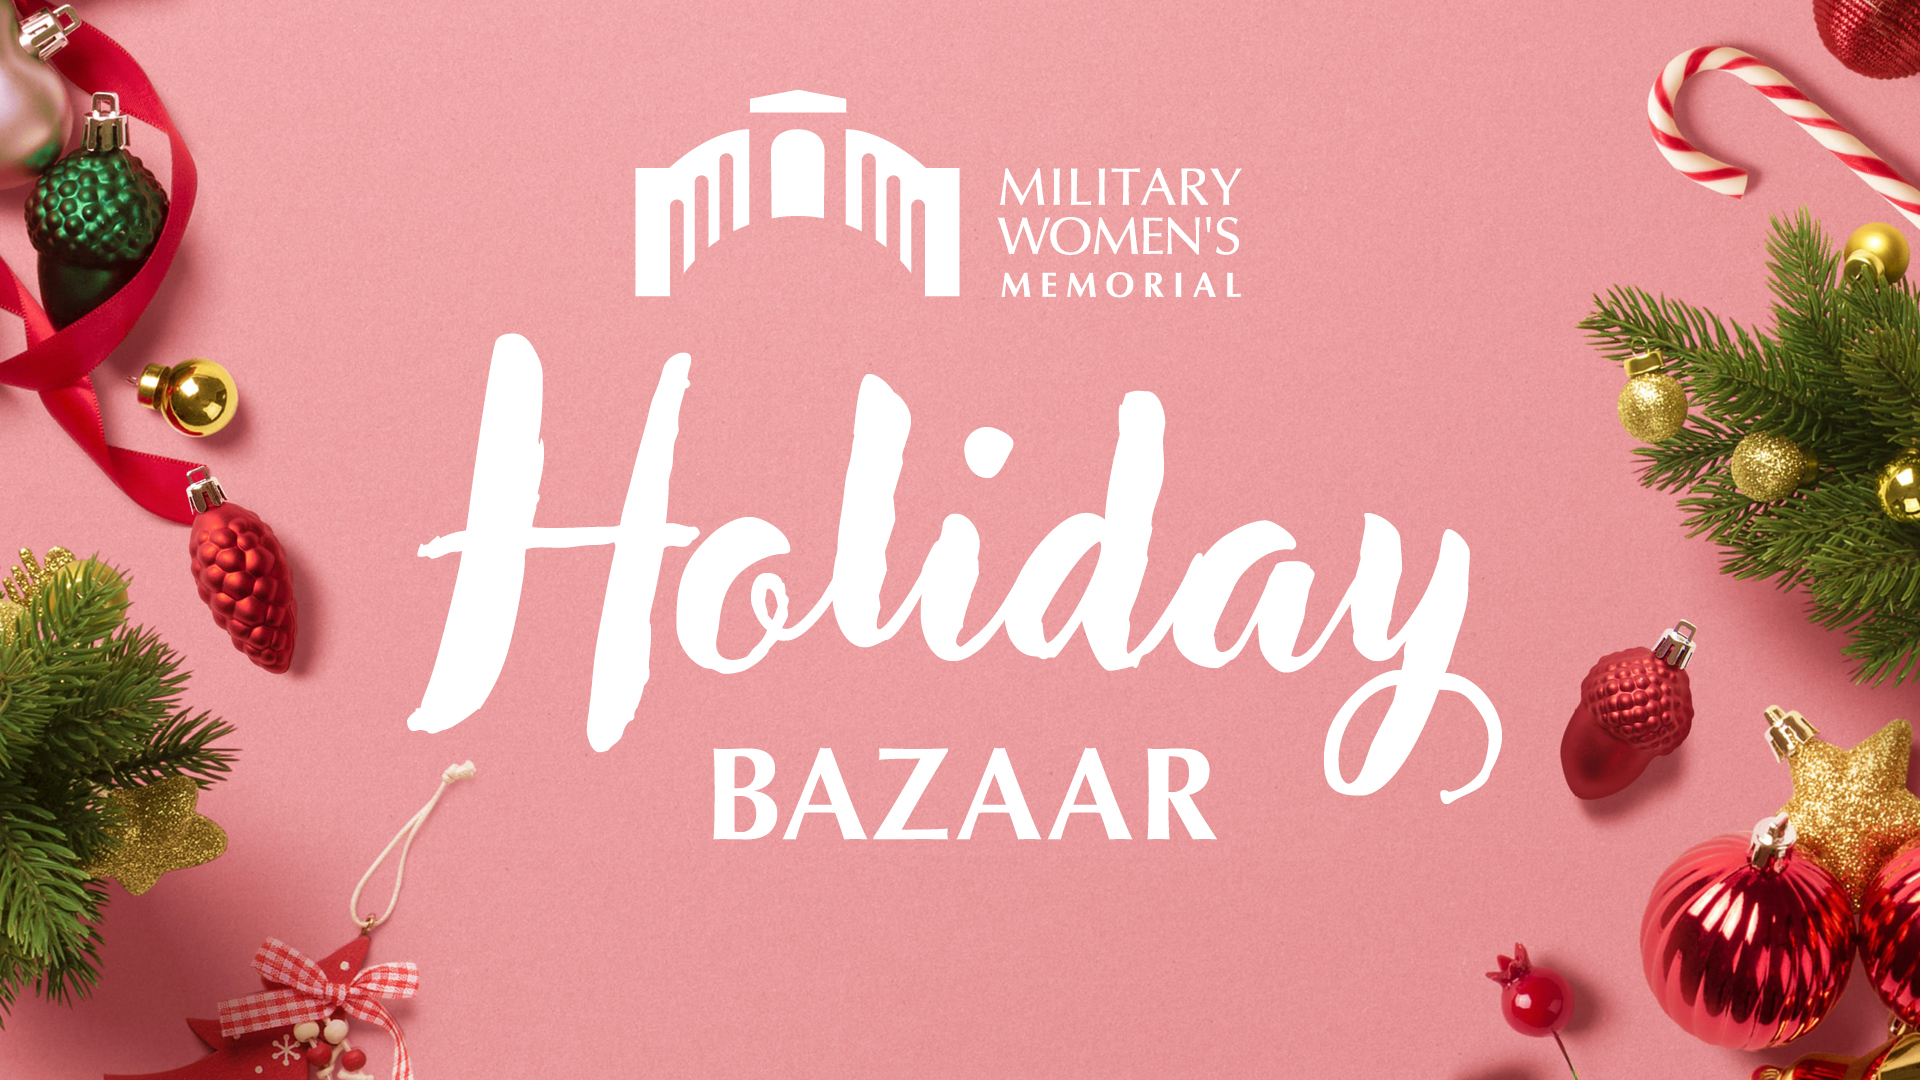 Holiday bazaar banner on a pink background.